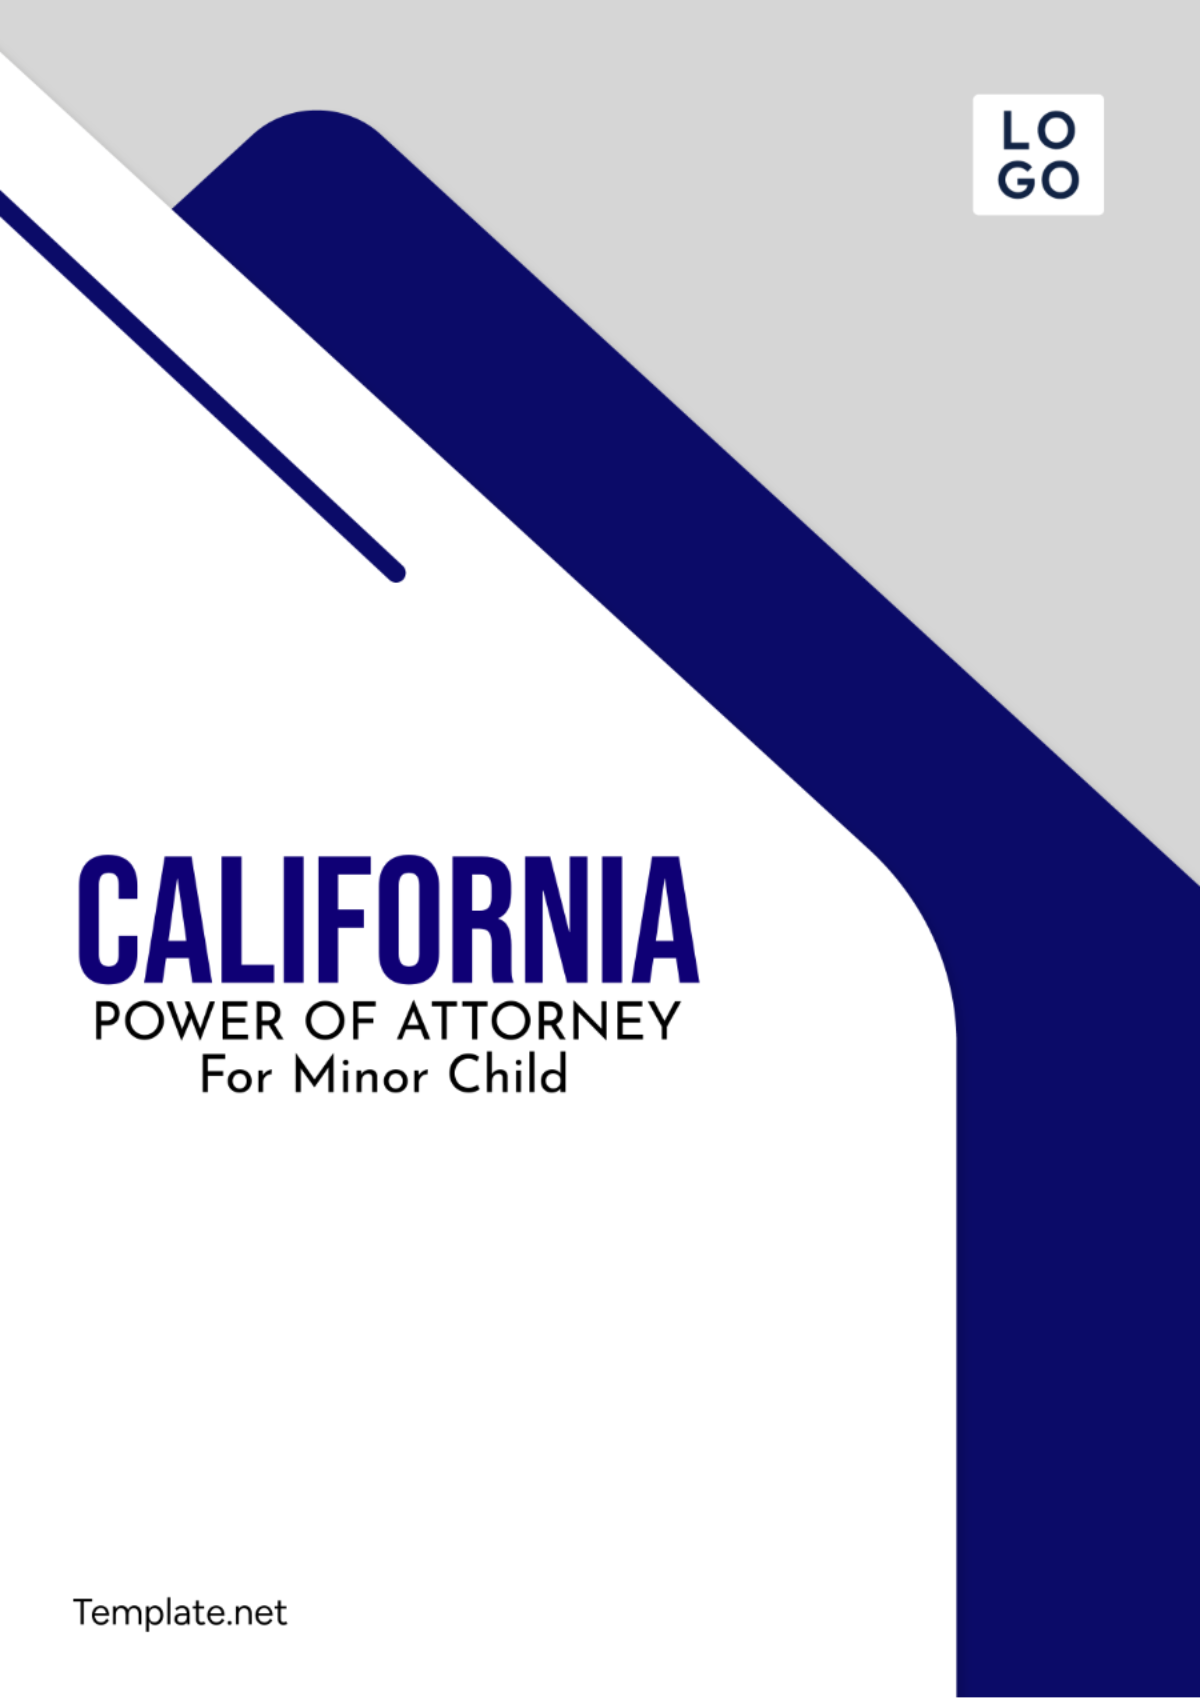 California Power of Attorney For Minor Child Template